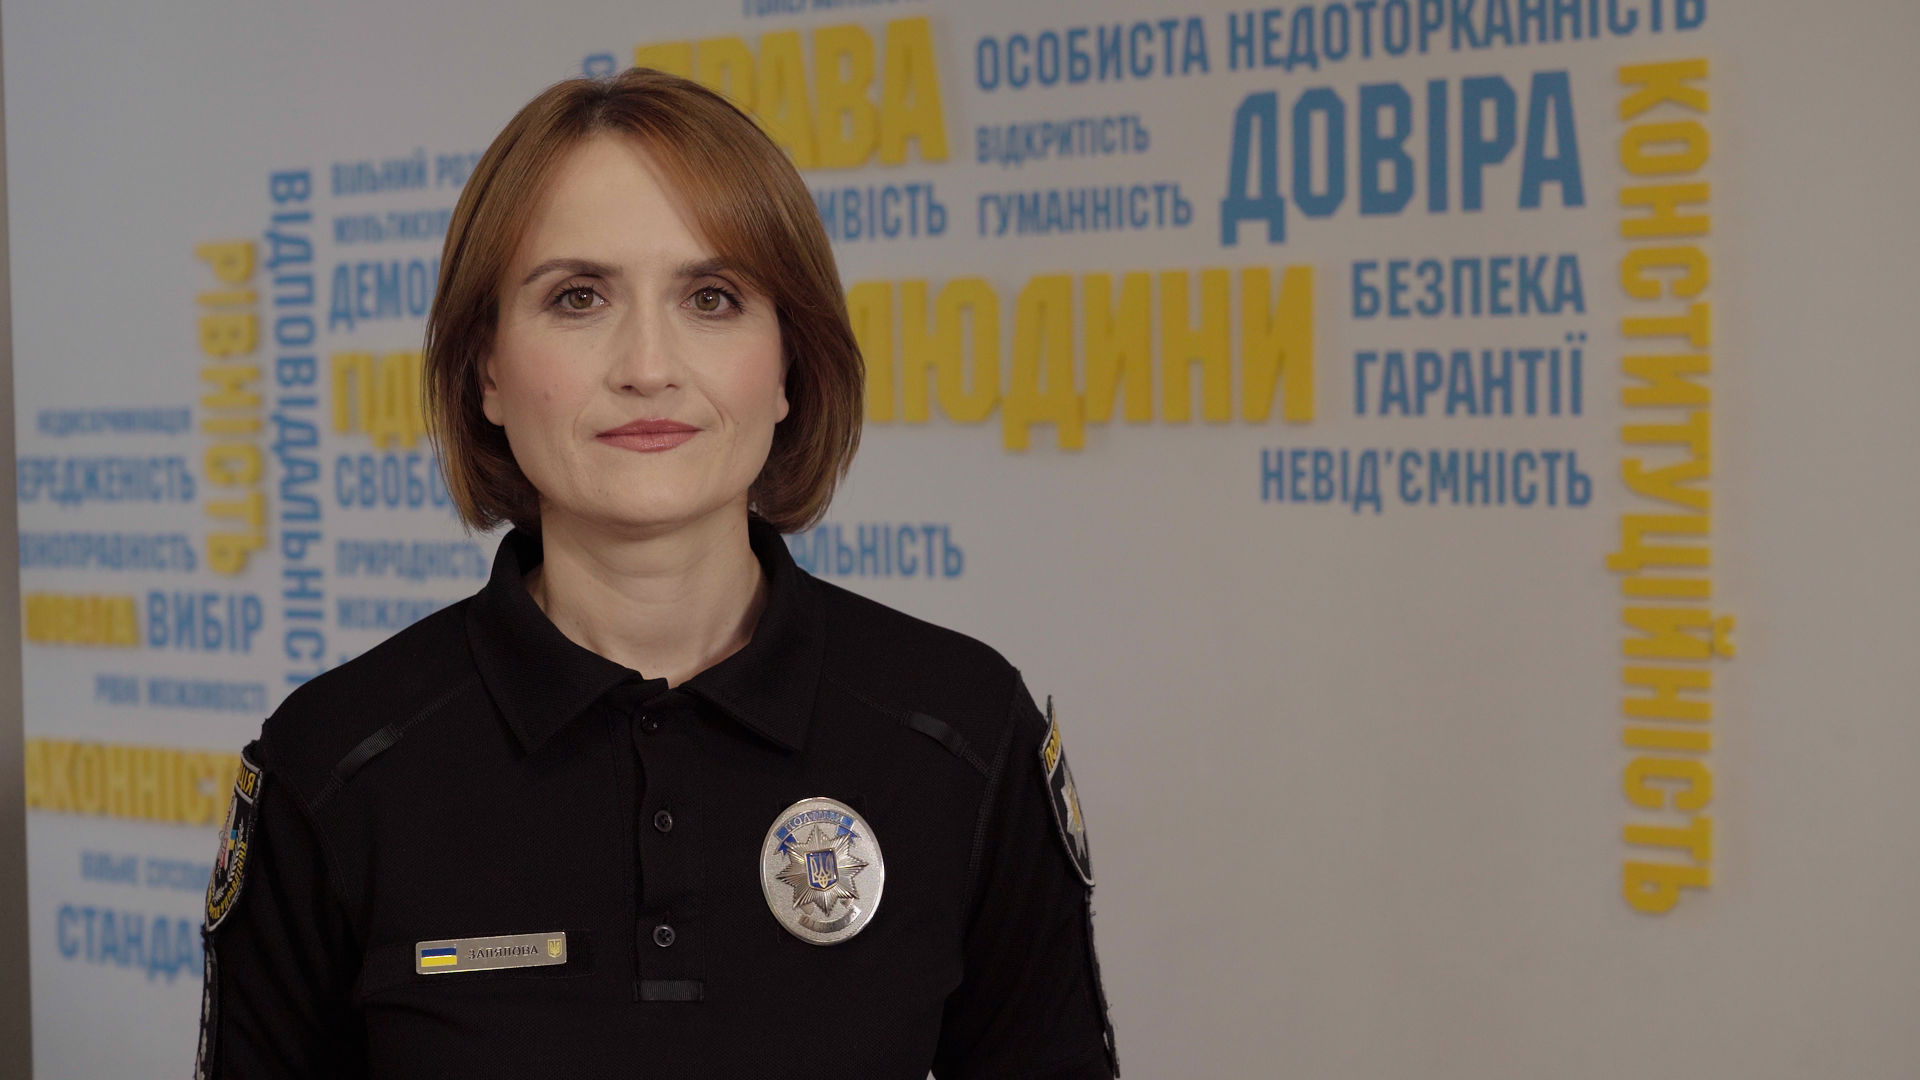 Iryna Zalialova, a police colonel in the Ukraine National Police service. She leads the Department for Monitoring Gender Equality and efforts to combat domestic violence under the Human Rights Compliance Department. Photo: Courtesy of Hromadske.